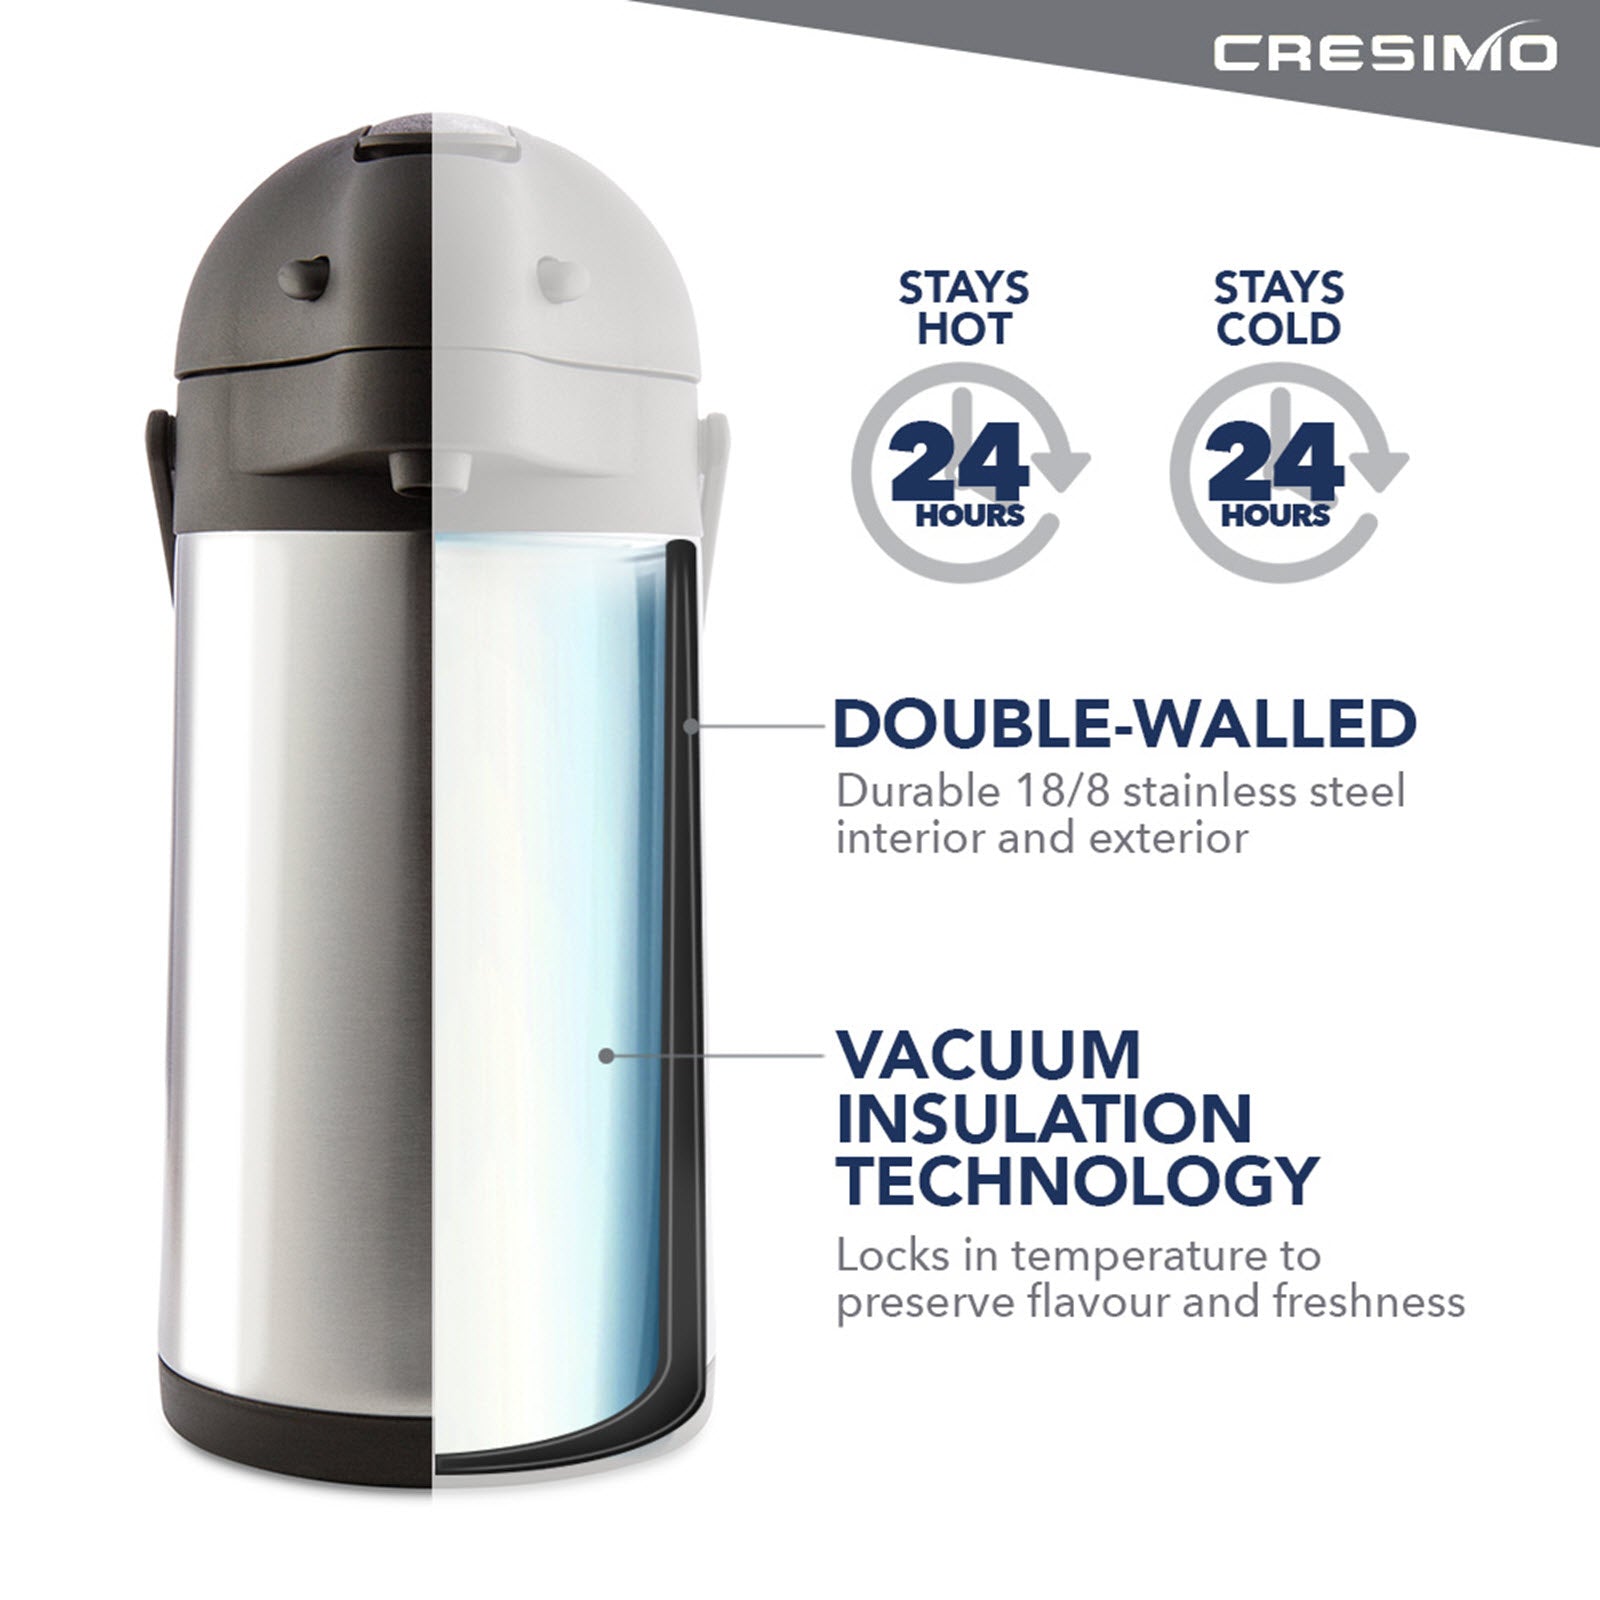 Cresimo 74 Oz (2.2L) Stainless Steel Thermal Airpot